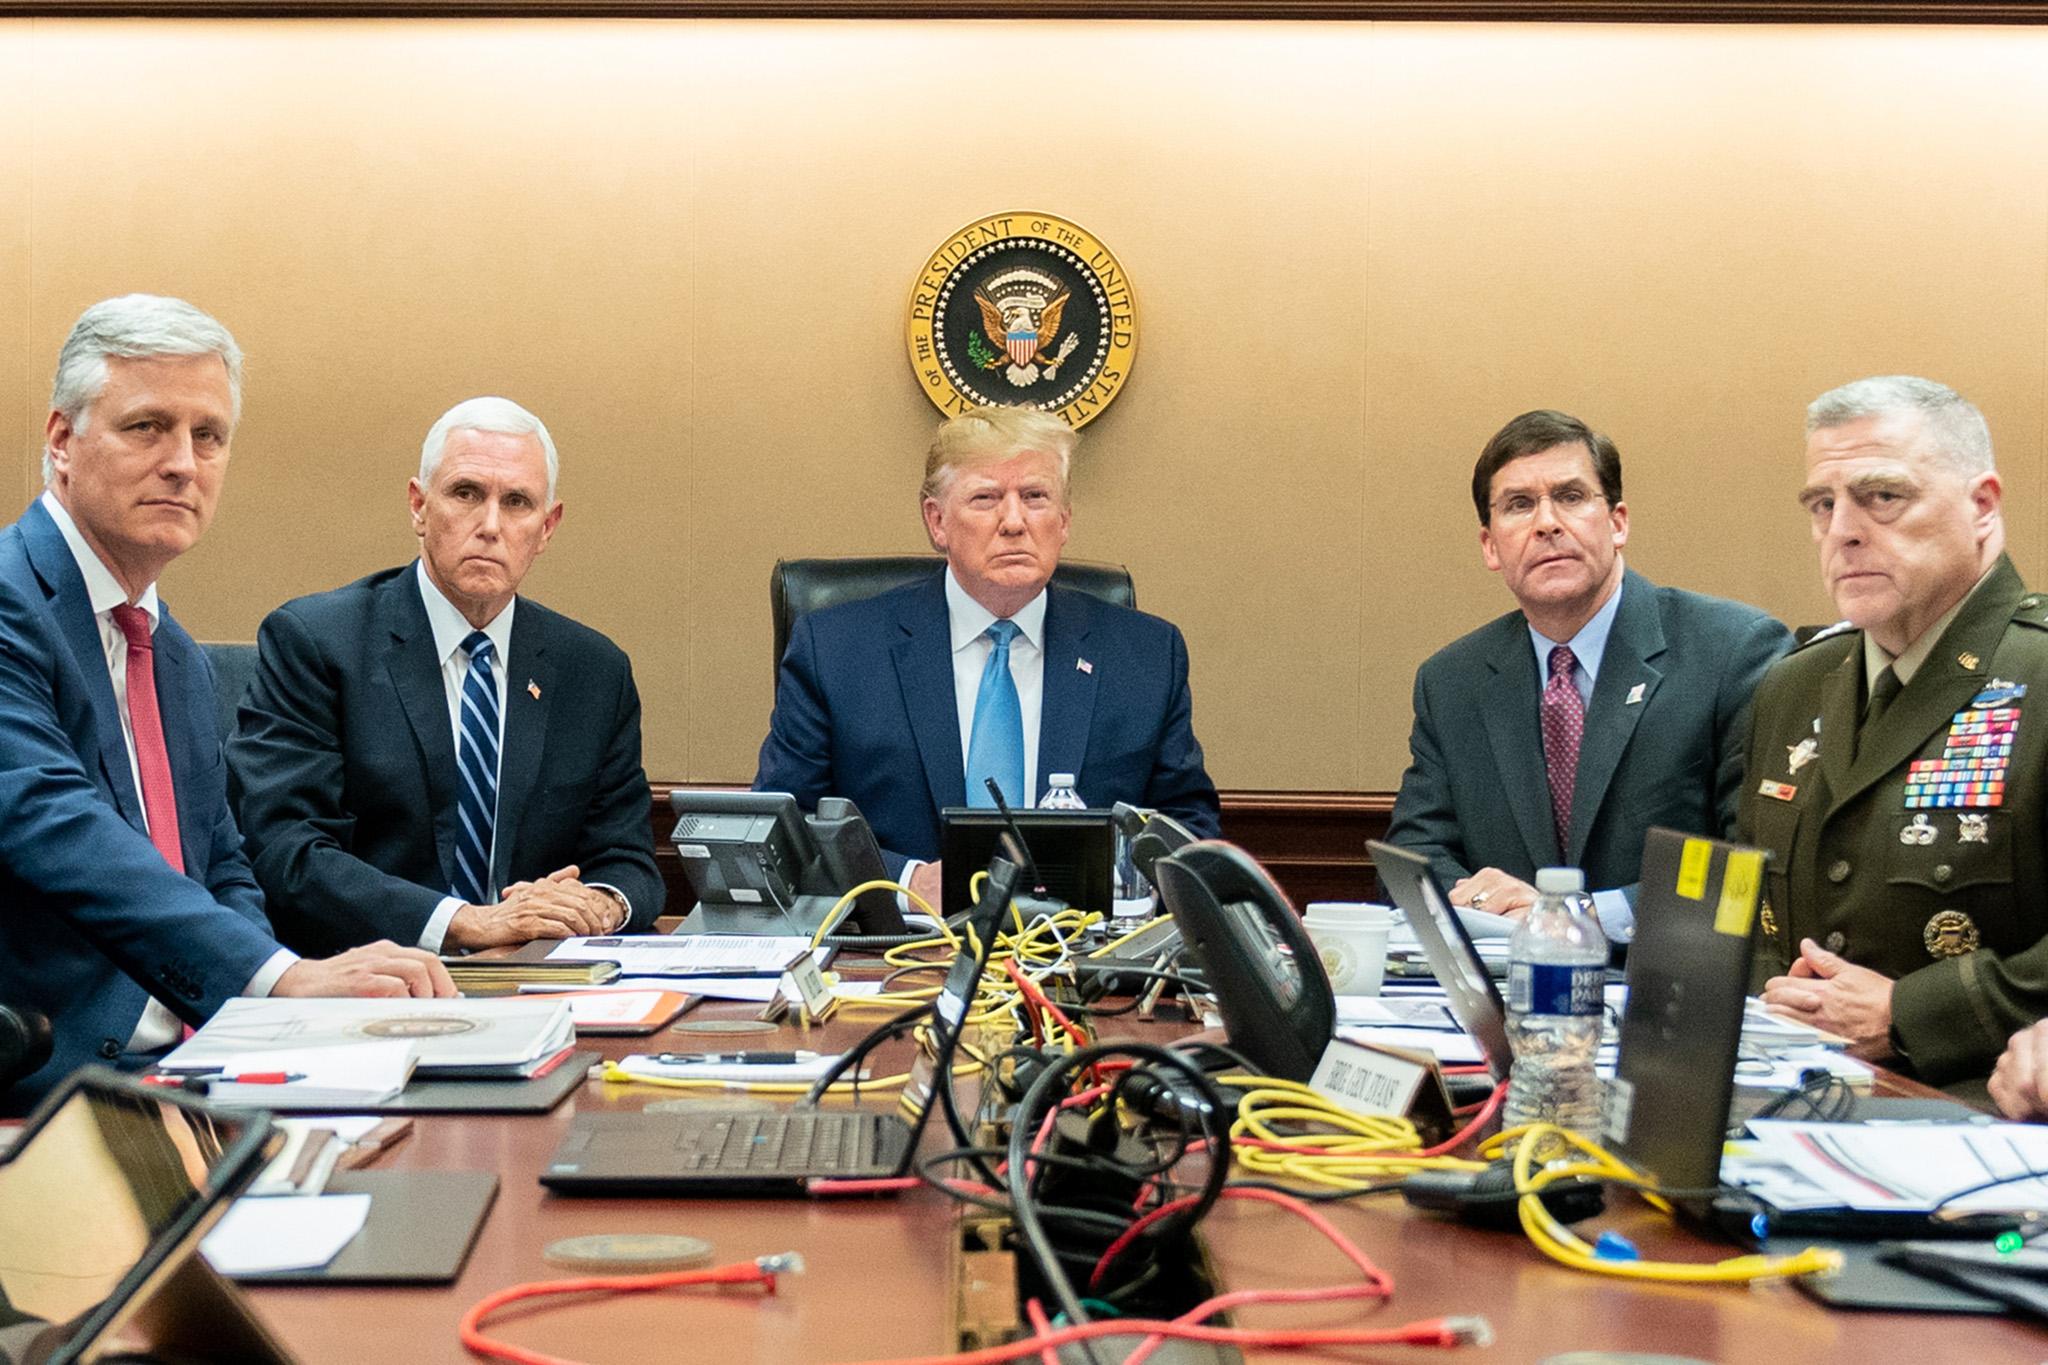 Donald Trump with senior administration figures Mike Pence, Robert O'Brien, Mark Esper, and Mark Milley